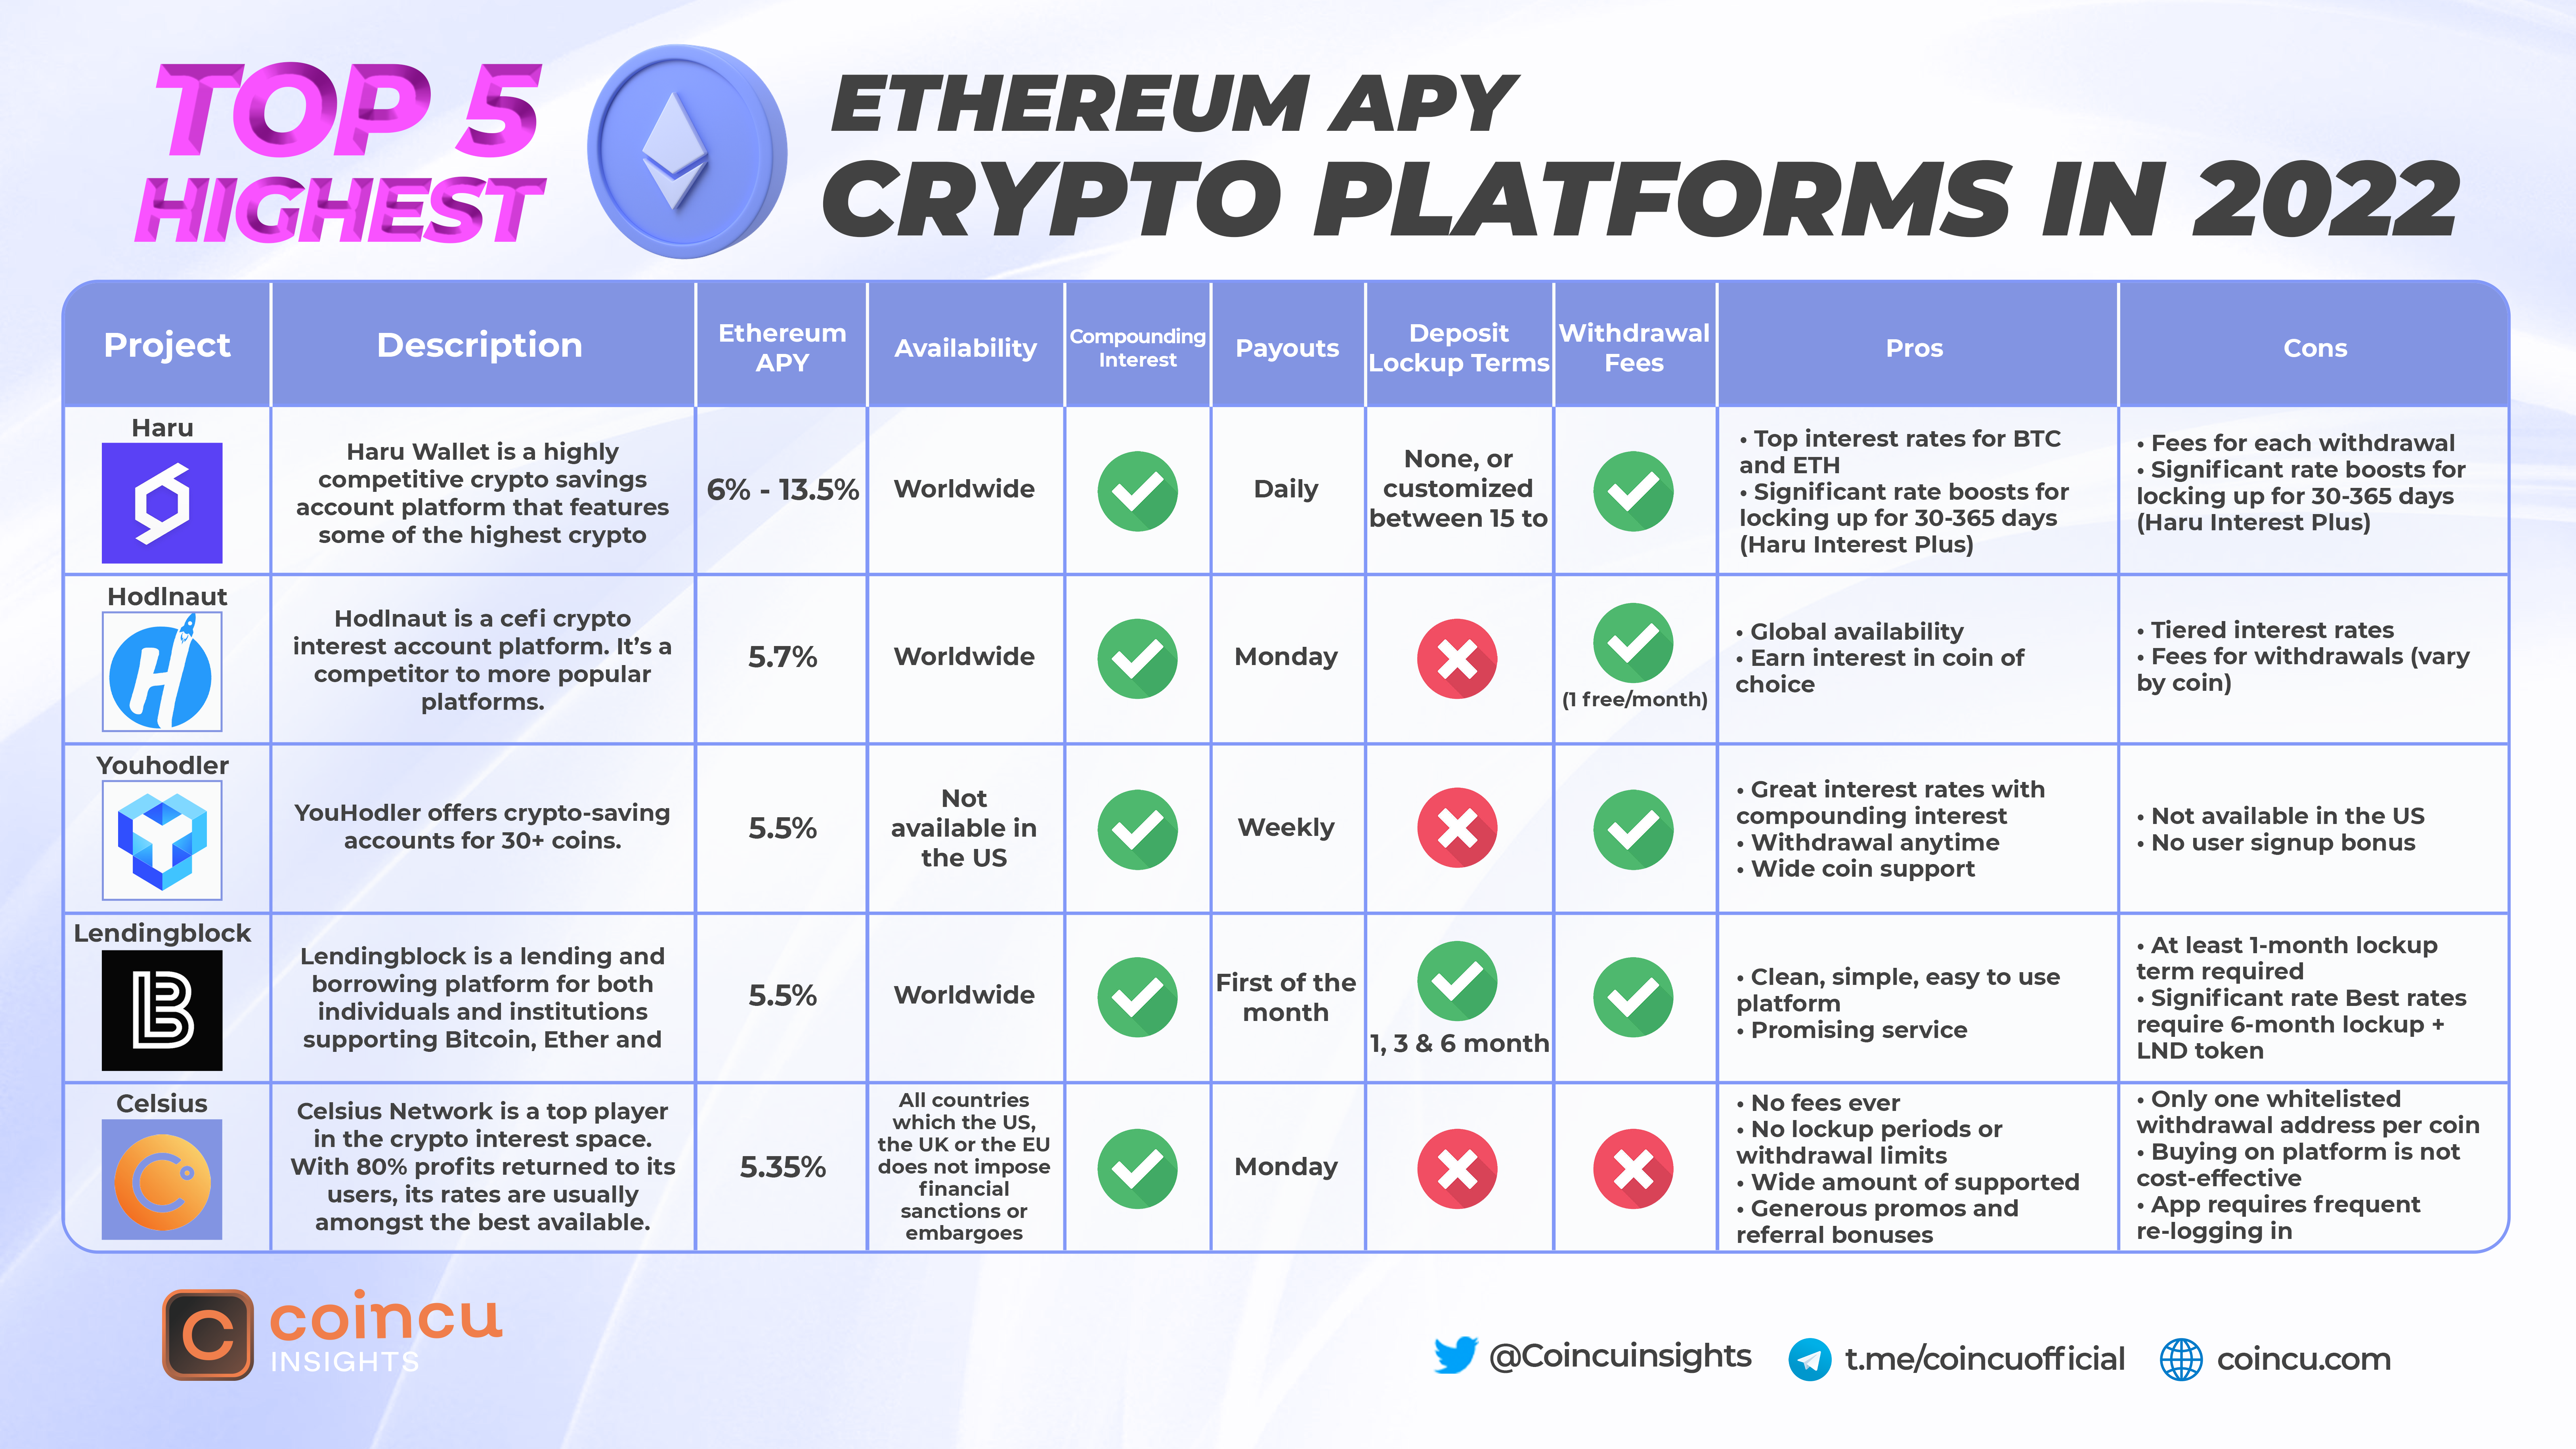 Top 5 highest Ethereum APY crypto platforms in 2022